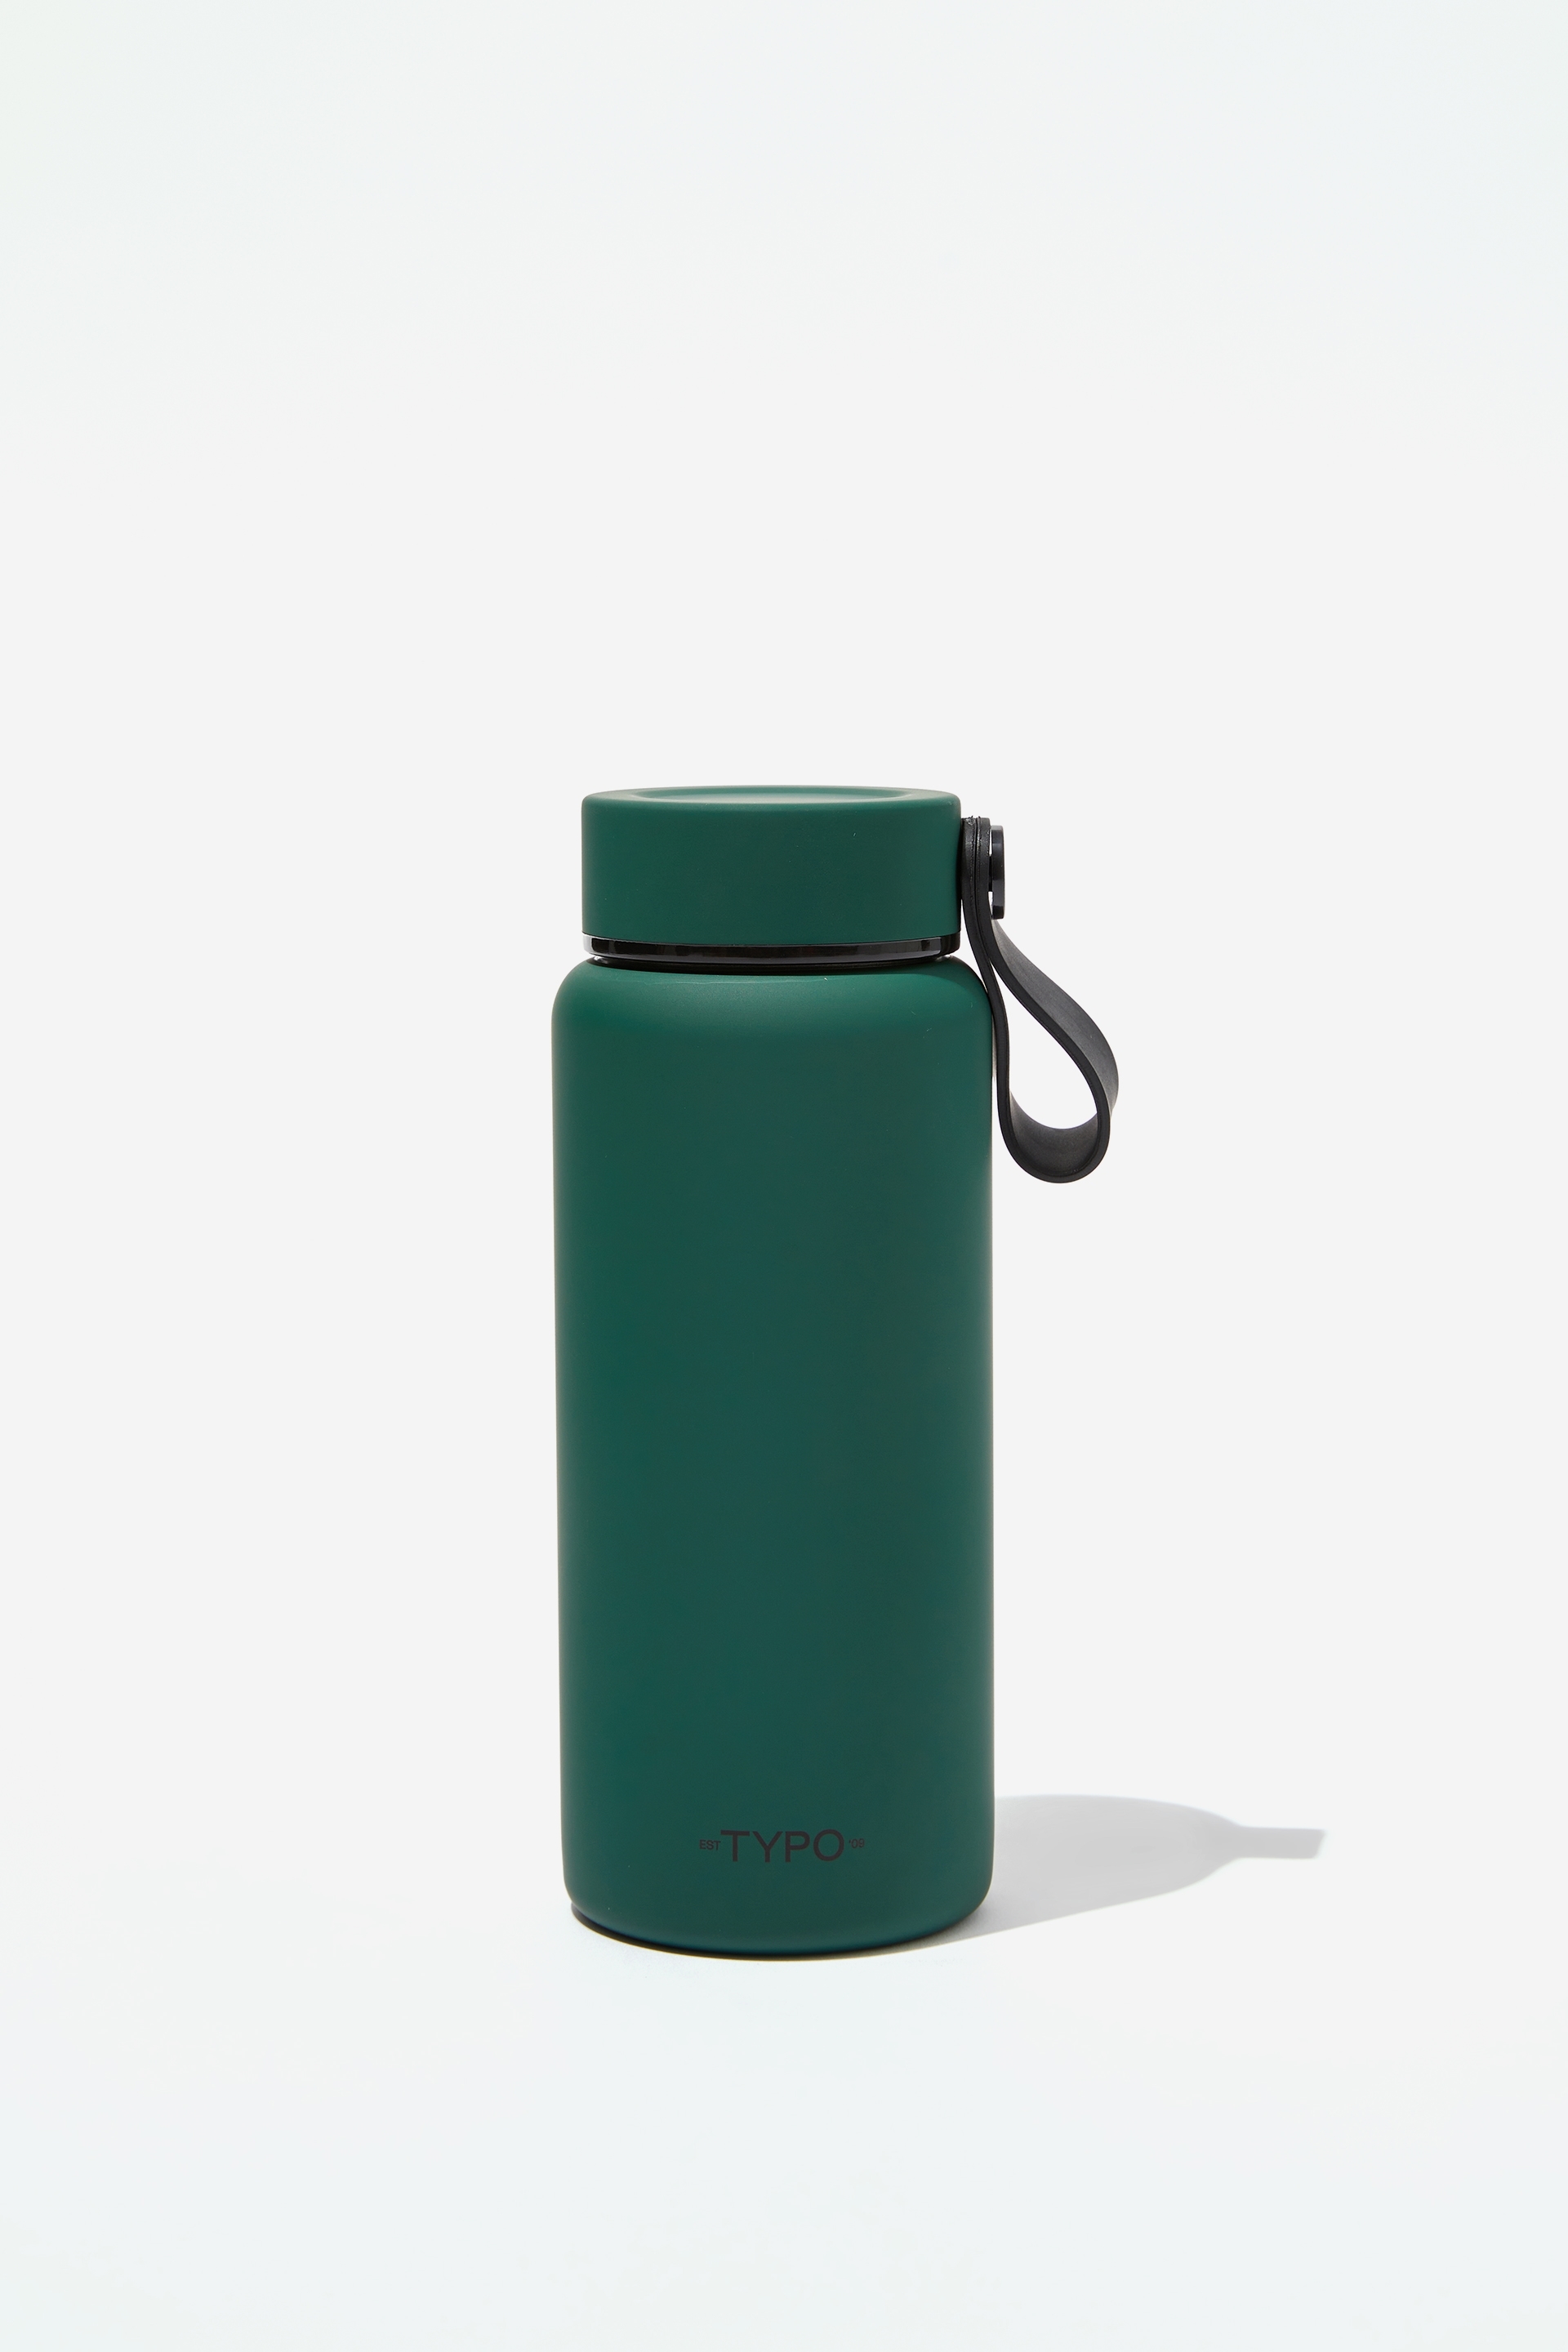 Typo - On The Move Drink Bottle 350ML 2.0 - Heritage green